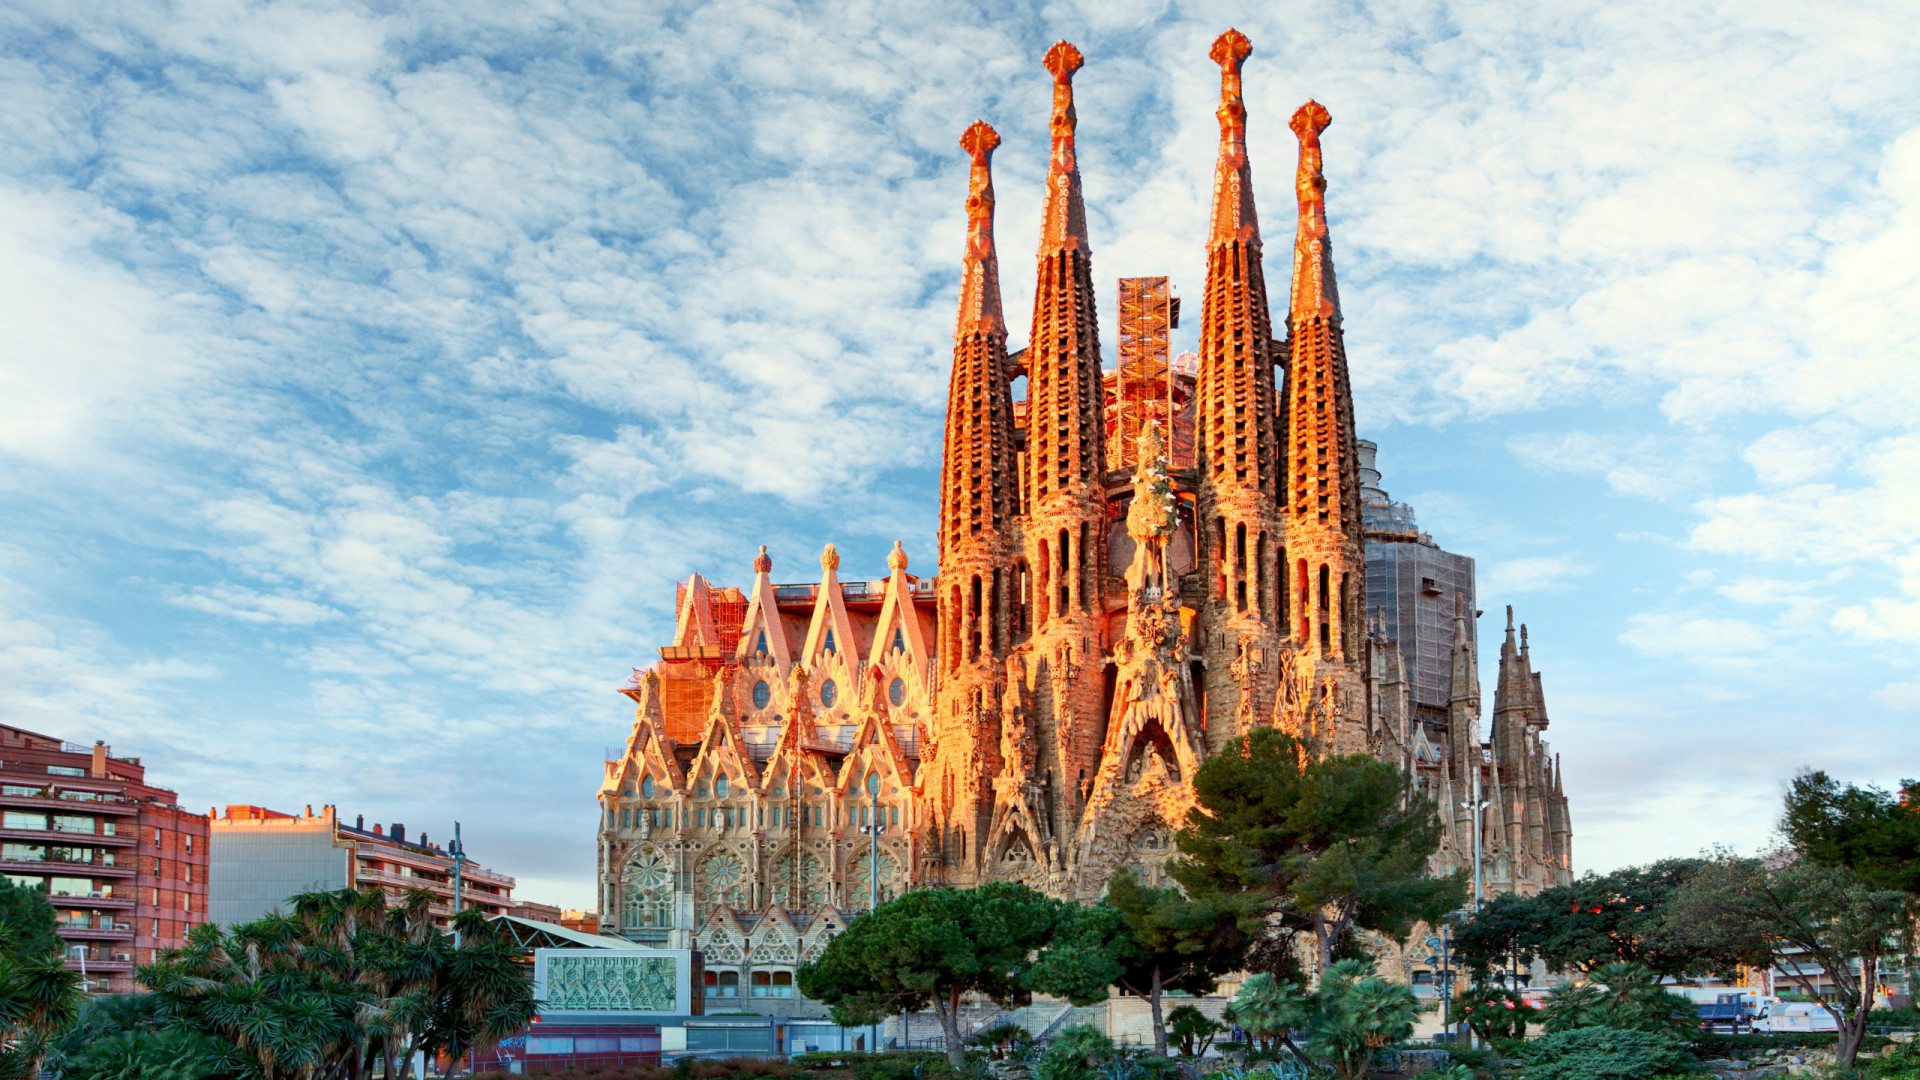 <p>Gaudí's unfinished masterpiece continues its journey towards completion. Ongoing construction may restrict access to certain areas of the basilica, but these works are pivotal in realizing the full vision of this architectural wonder.</p><p><a href="https://www.msn.com/en-us/community/channel/vid-7xx8mnucu55yw63we9va2gwr7uihbxwc68fxqp25x6tg4ftibpra?cvid=94631541bc0f4f89bfd59158d696ad7e">Follow us and access great exclusive content every day</a></p>